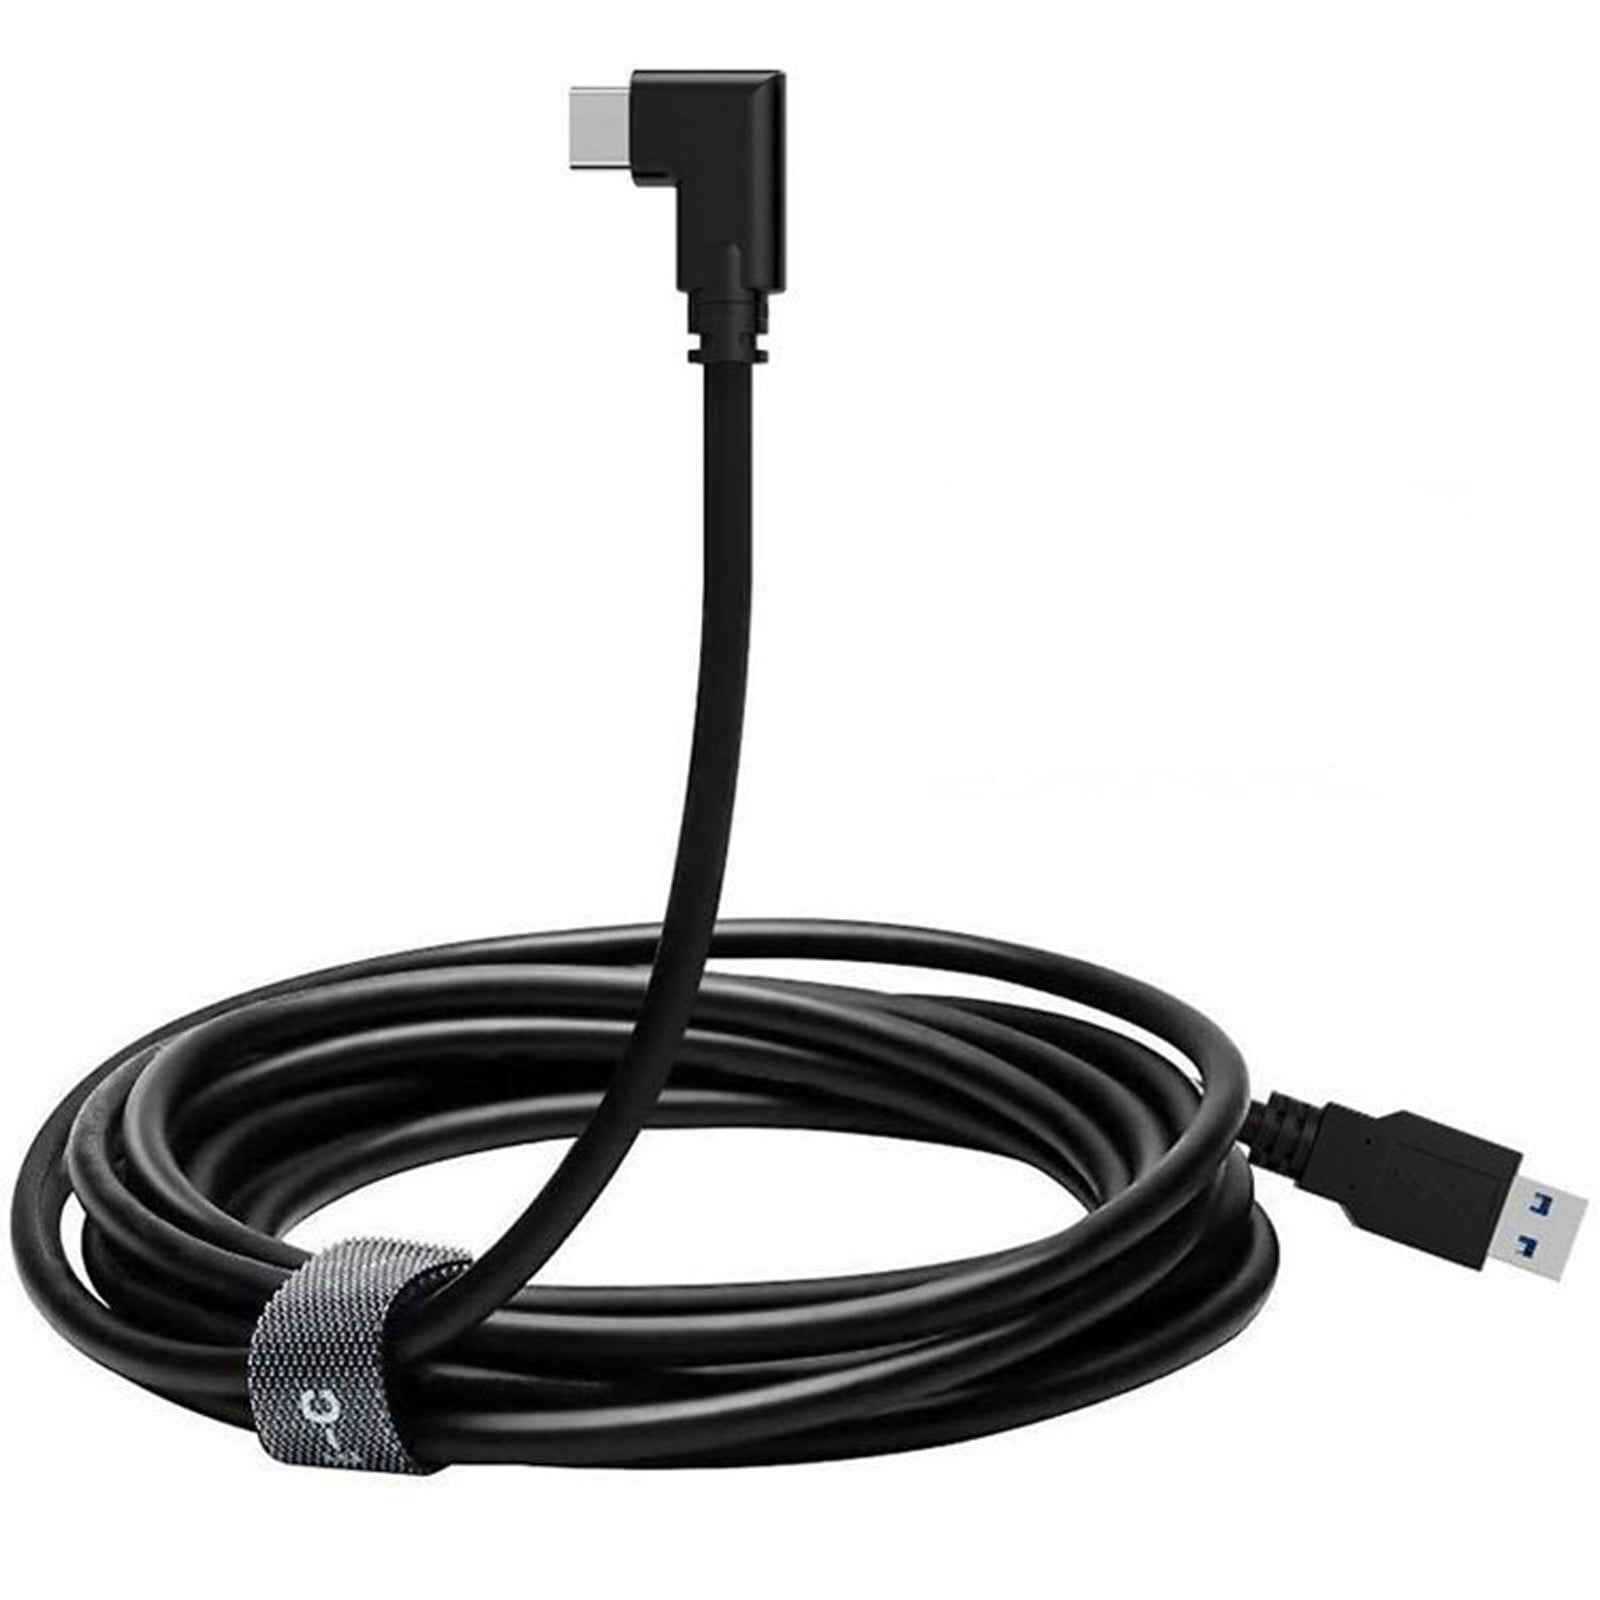 Compatible for Oculus Quest 2 Link Cable 16FT Link Cable for Oculus Quest 2  / Quest 1 / Rift S, USB 3.0 Type A to C High Speed Data Transfer Charging